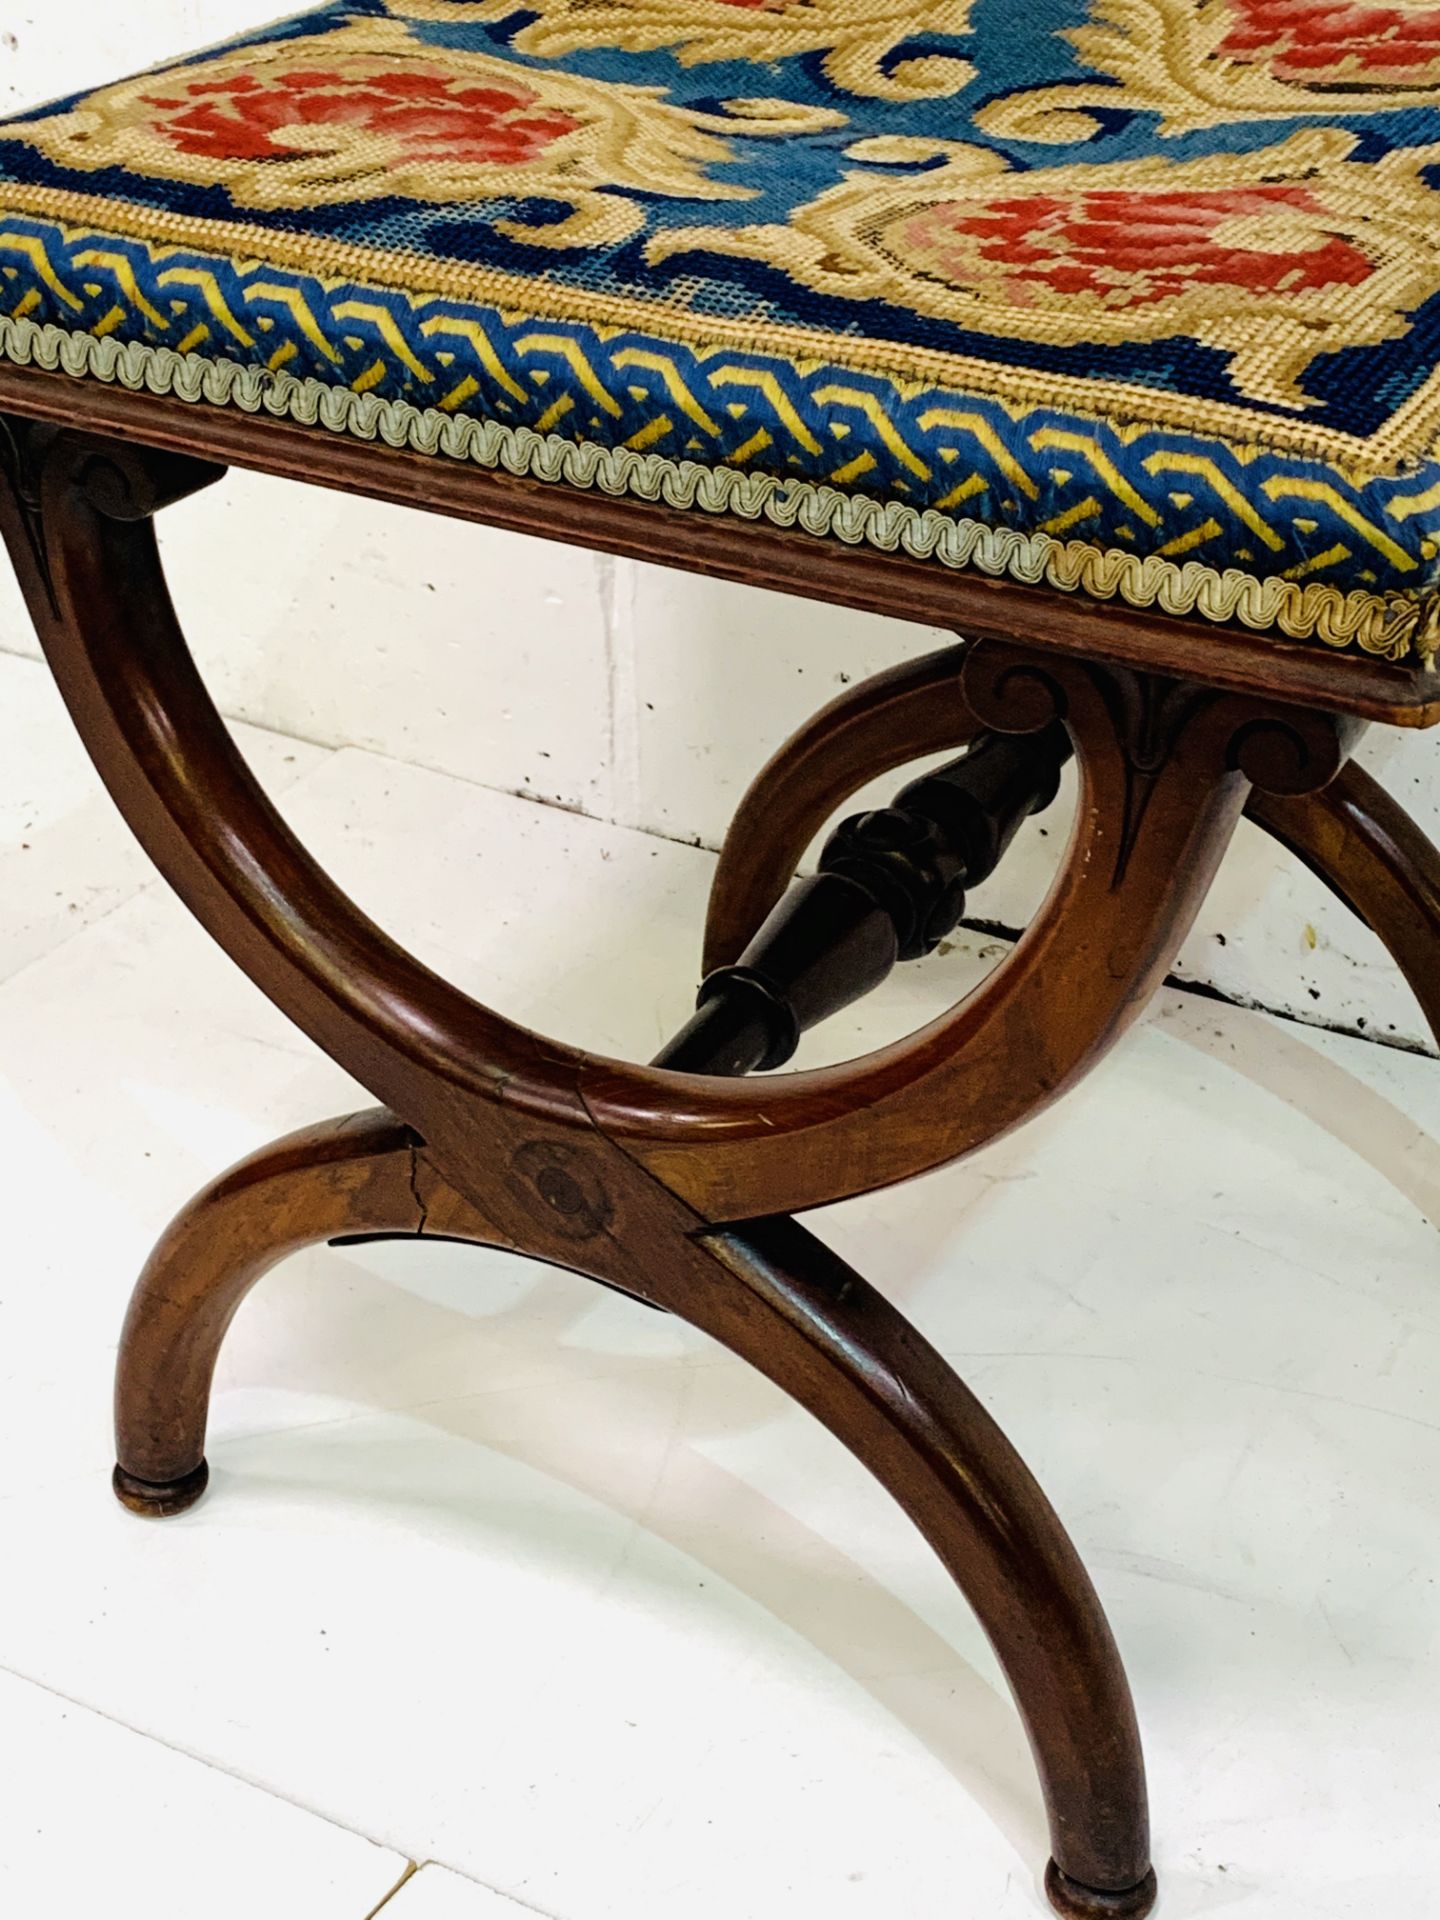 Mahogany X frame stool with tapestry seat - Image 2 of 3